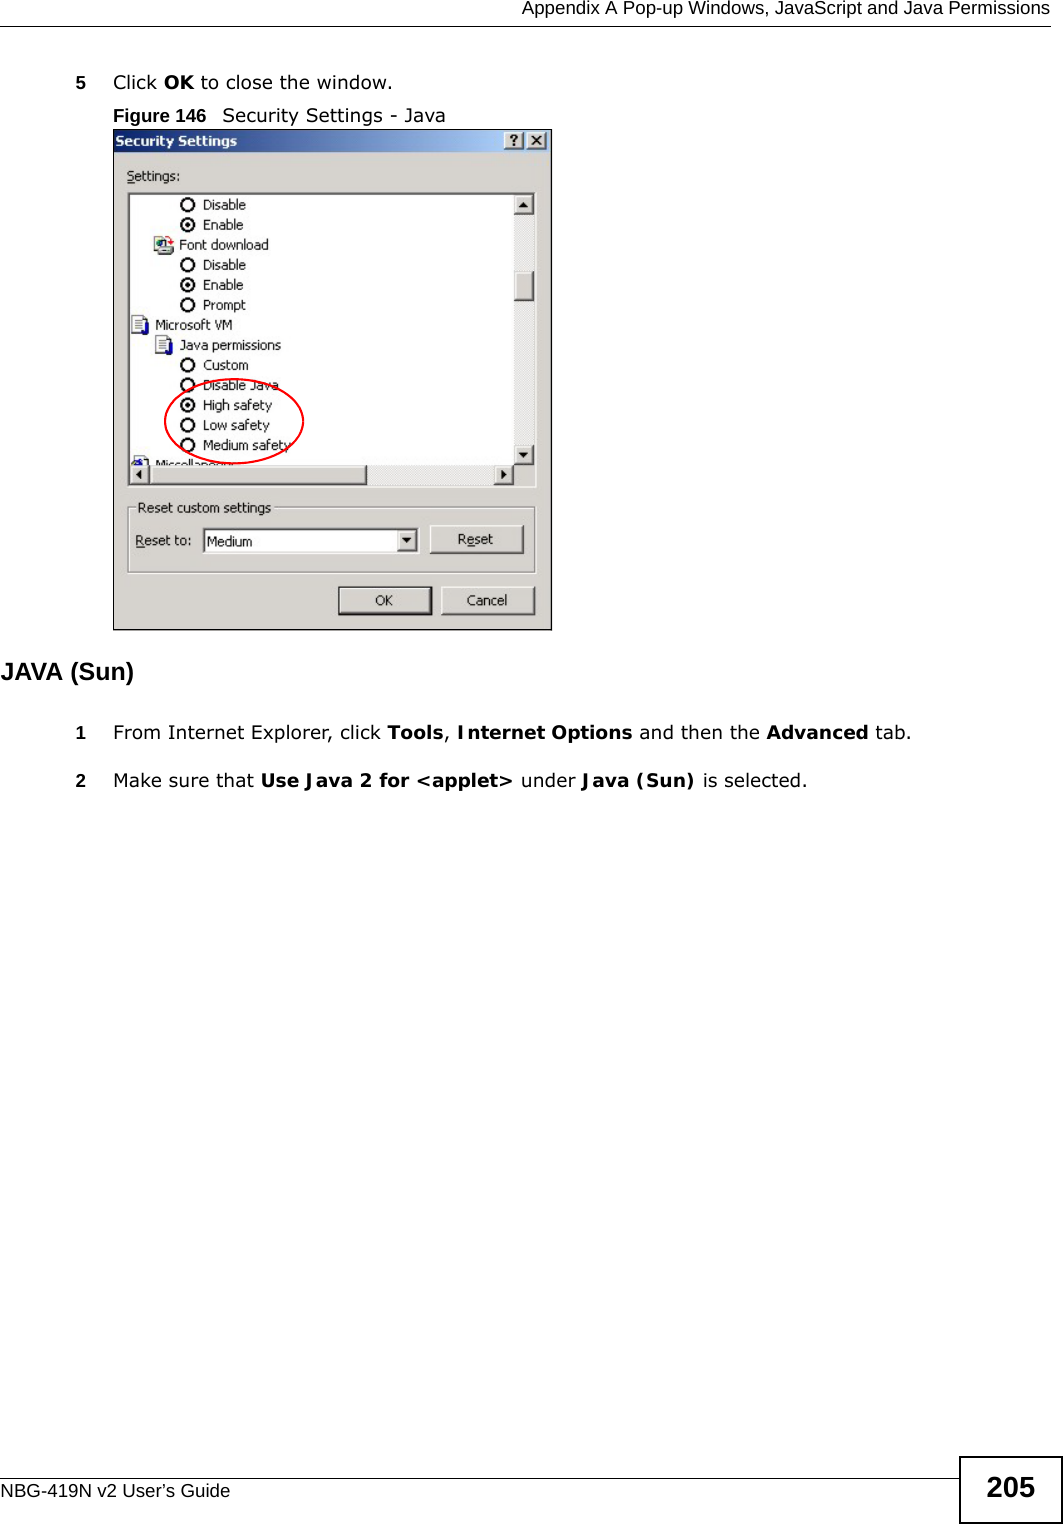  Appendix A Pop-up Windows, JavaScript and Java PermissionsNBG-419N v2 User’s Guide 2055Click OK to close the window.Figure 146   Security Settings - Java JAVA (Sun)1From Internet Explorer, click Tools, Internet Options and then the Advanced tab. 2Make sure that Use Java 2 for &lt;applet&gt; under Java (Sun) is selected.